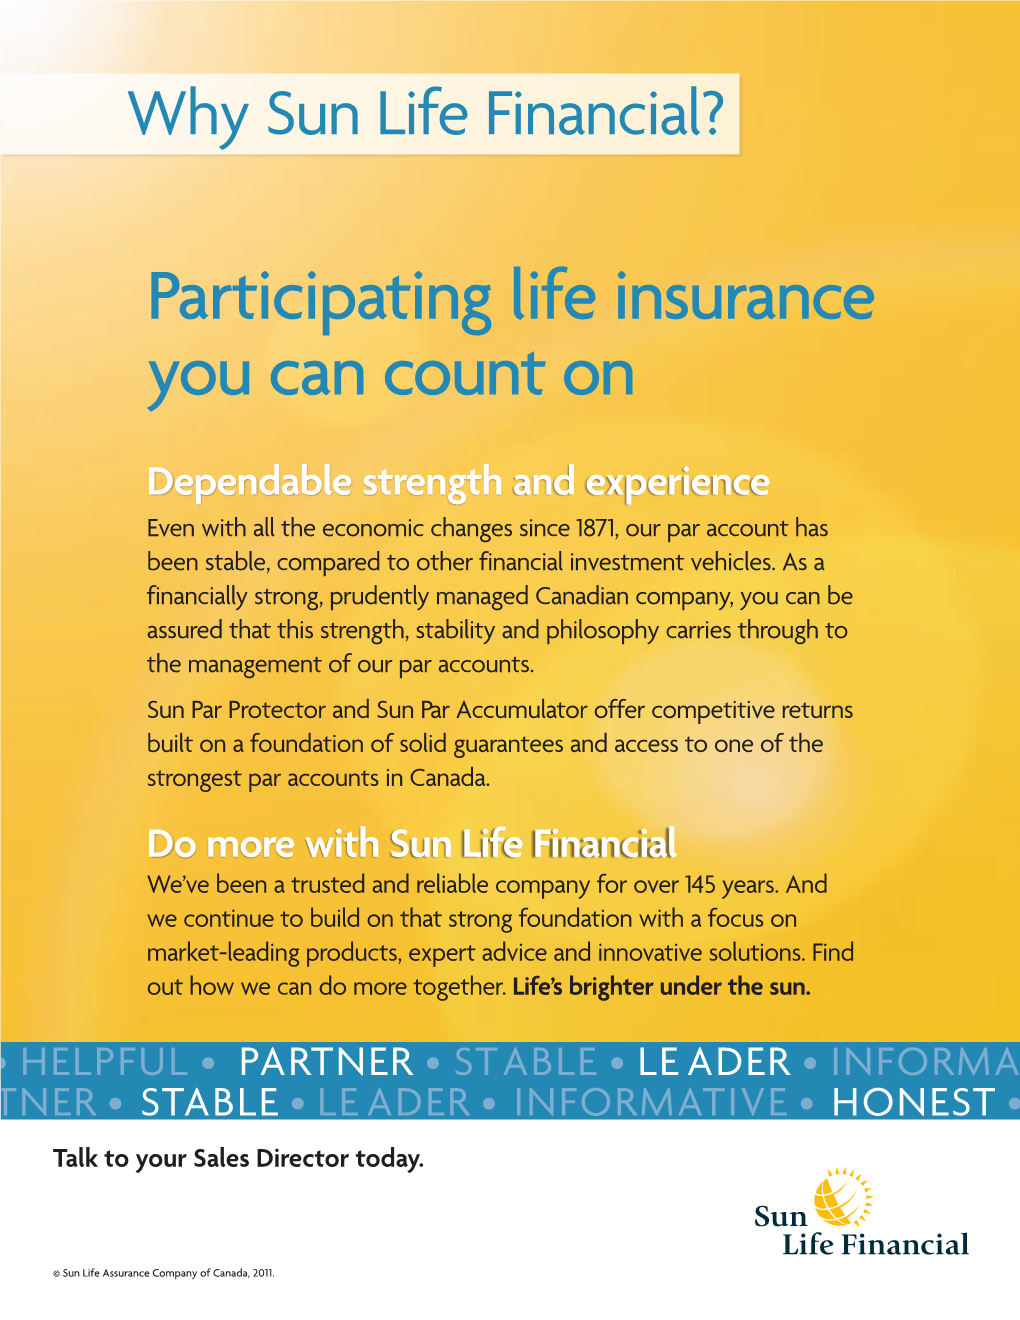 Participating Life Insurance You Can Count On